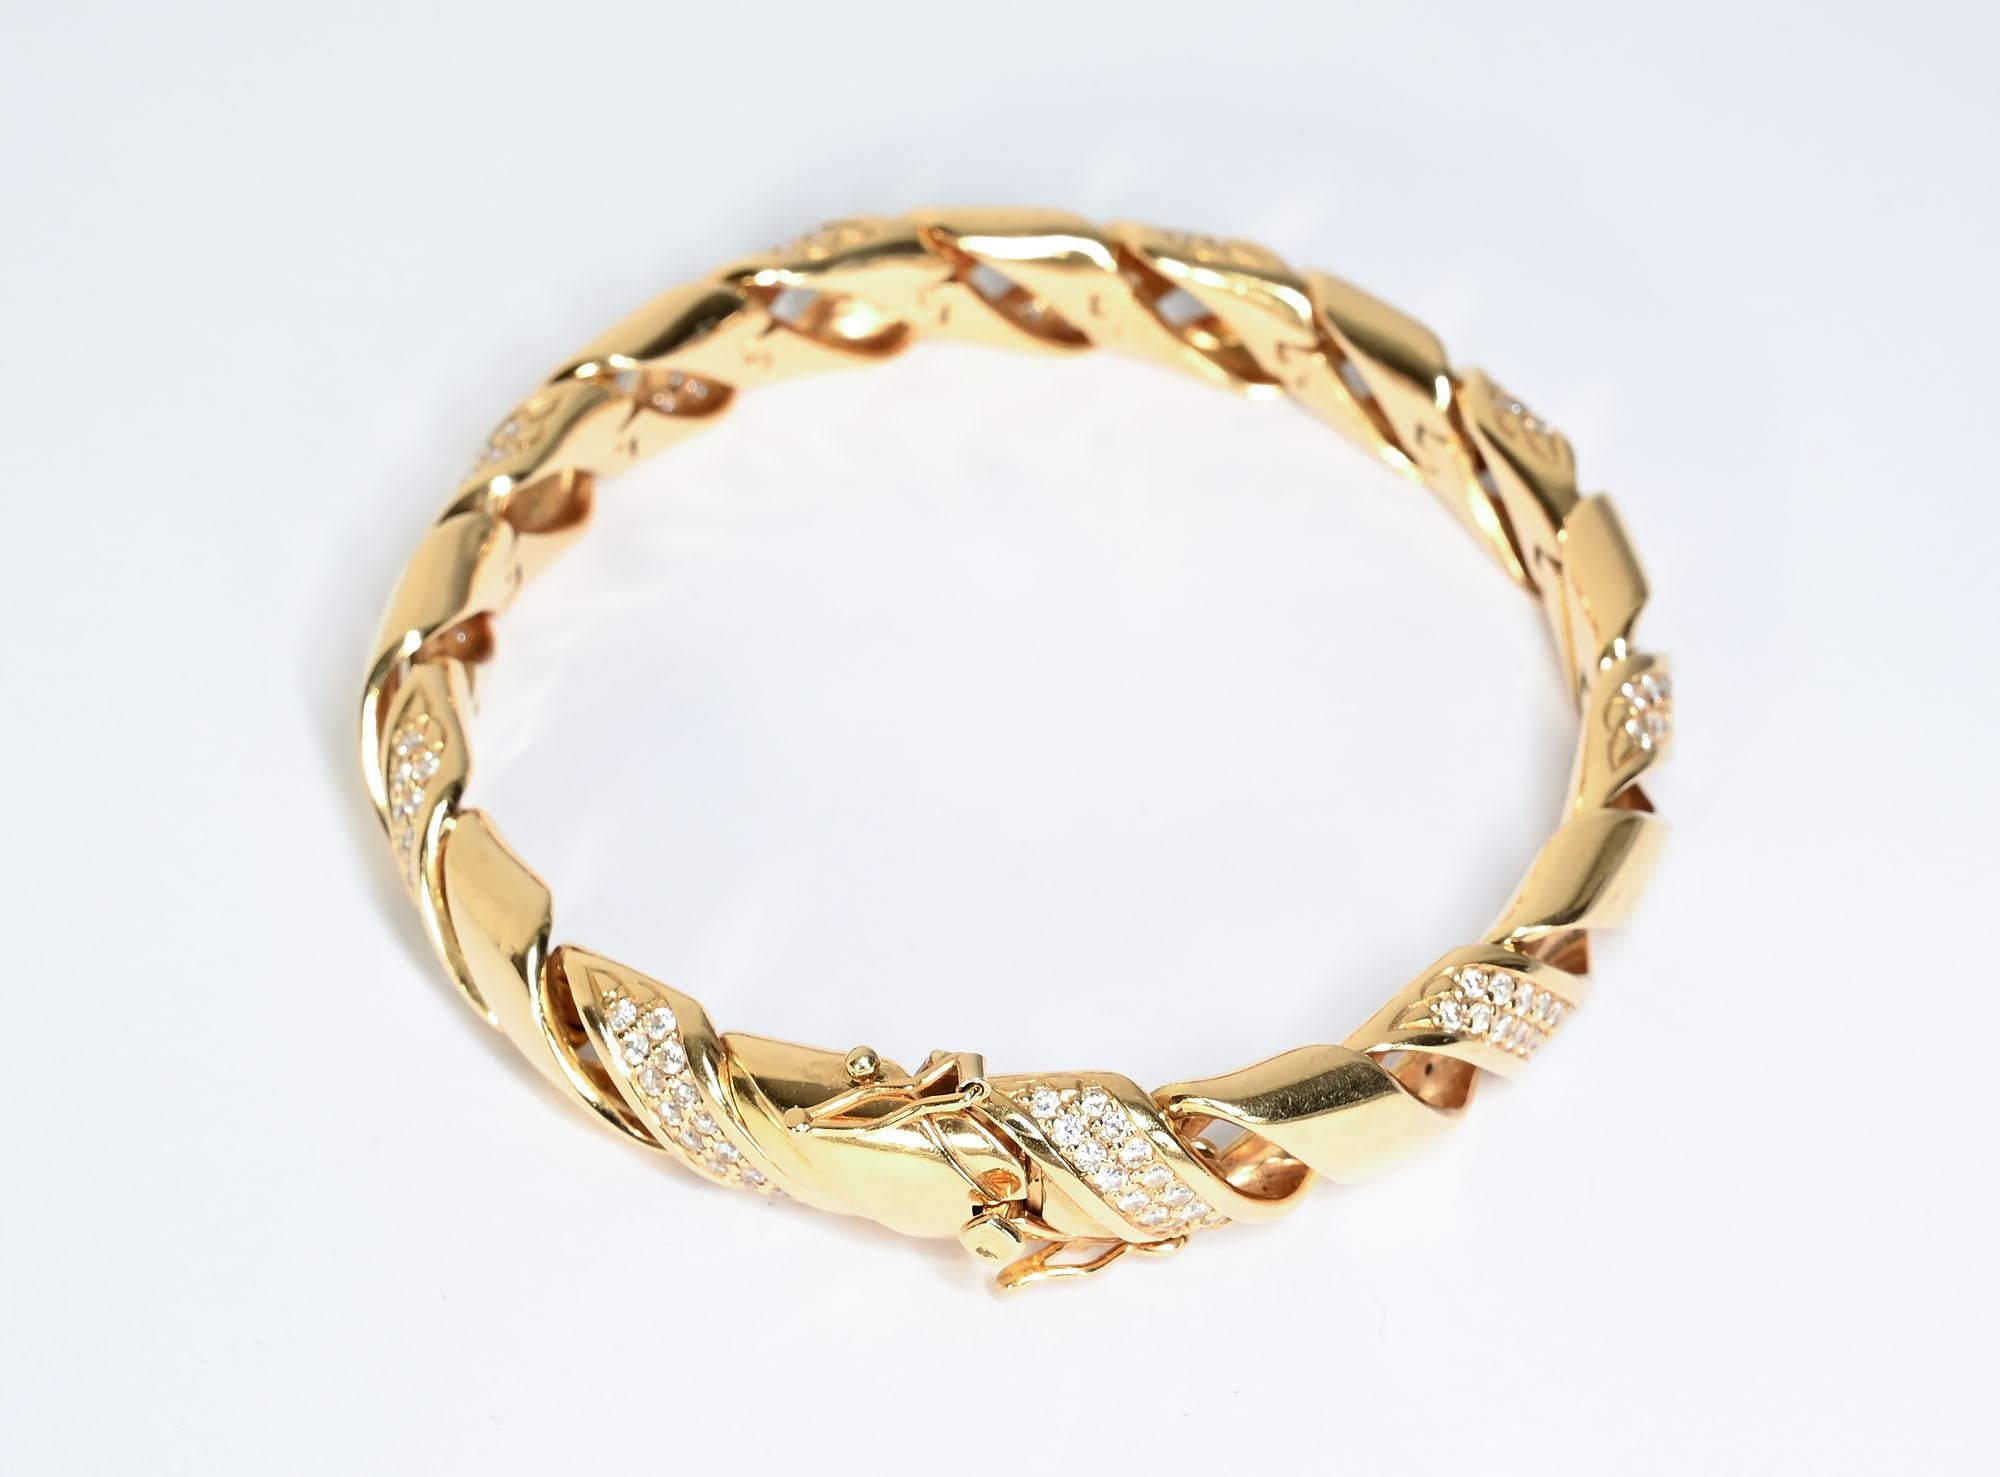 Gold and Diamond Woven Bracelet In Excellent Condition For Sale In Darnestown, MD